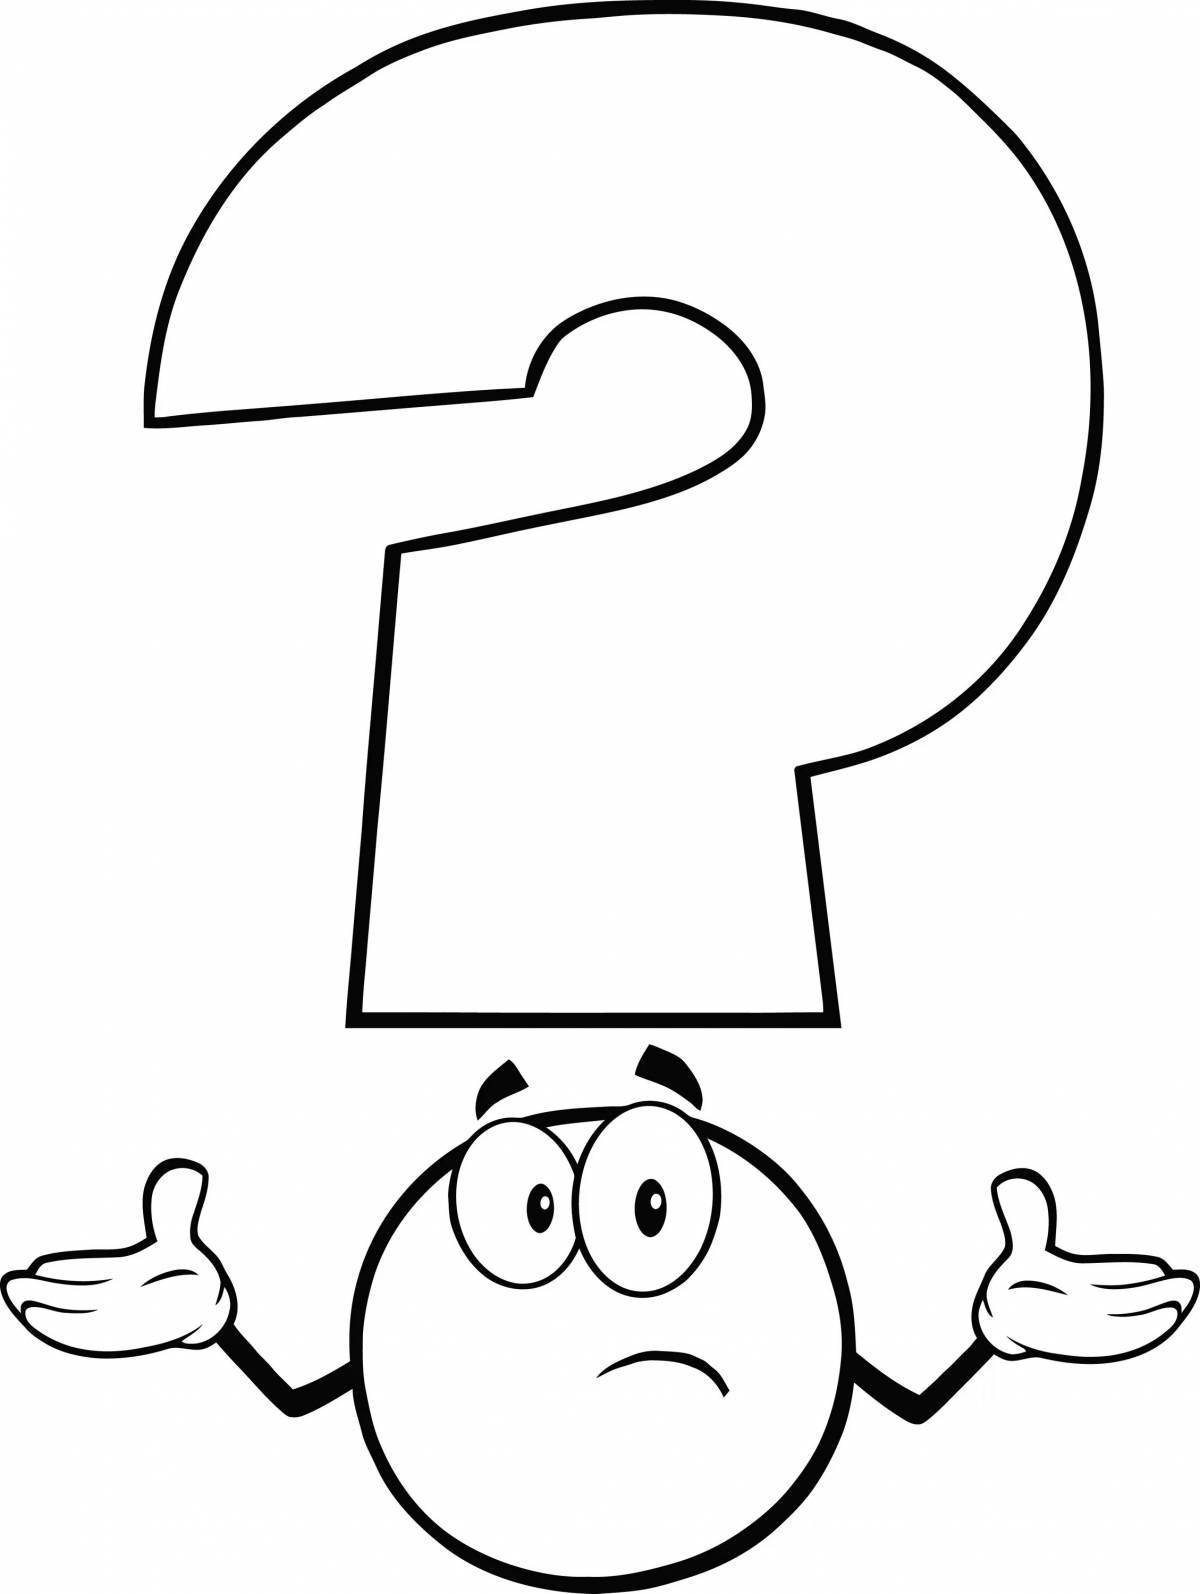 Cute question mark coloring page